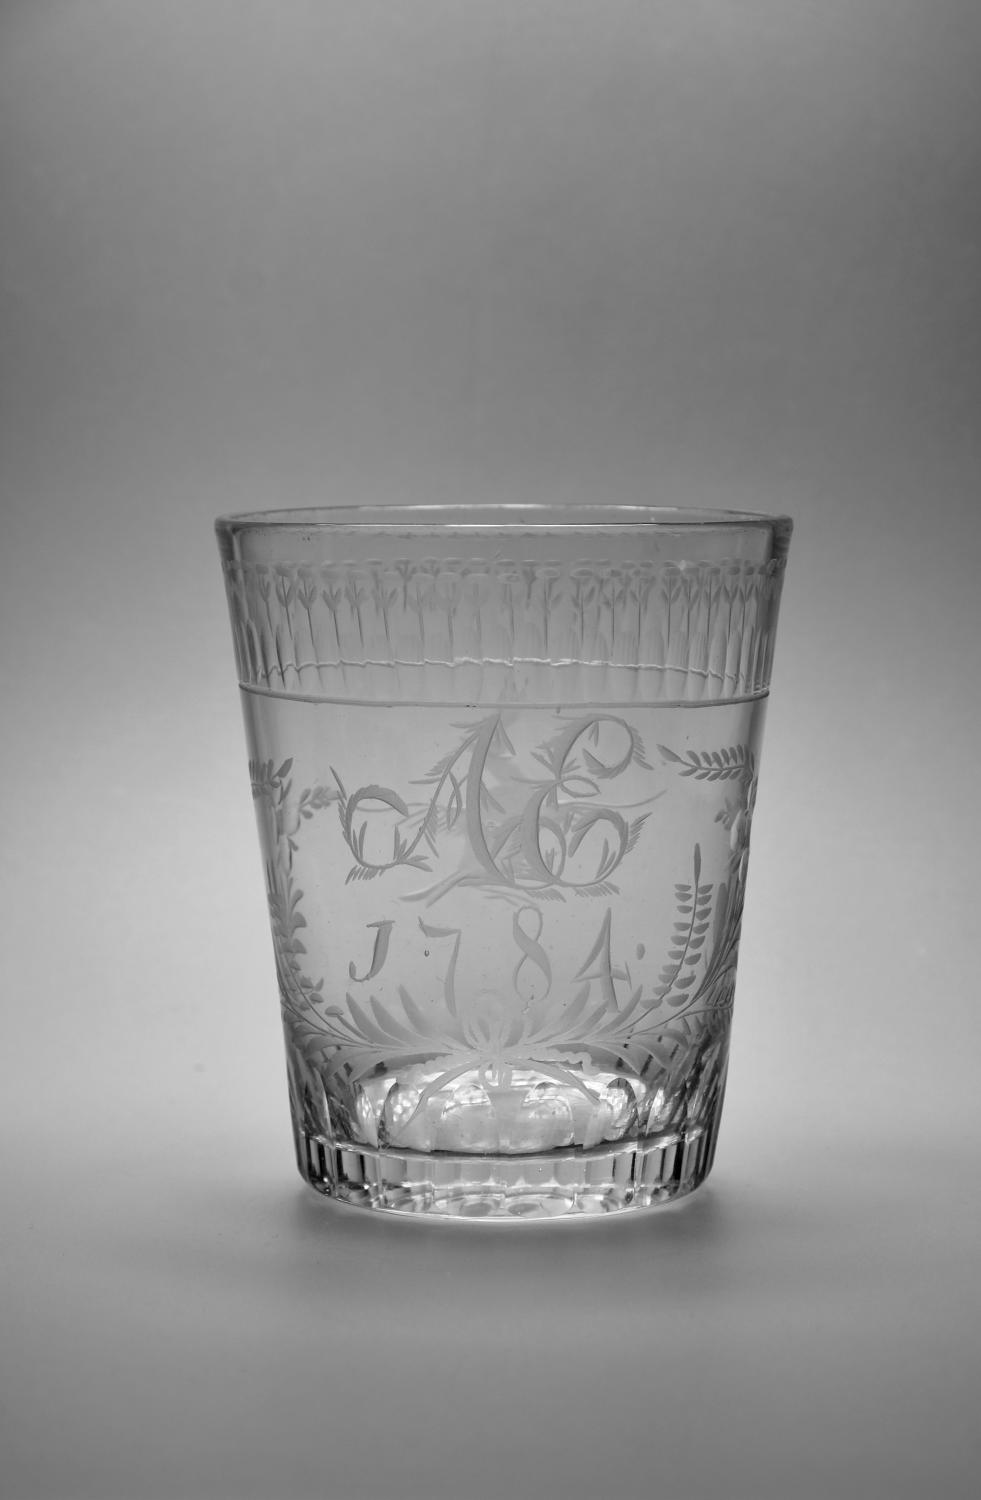 Engraved tumbler dated 1784